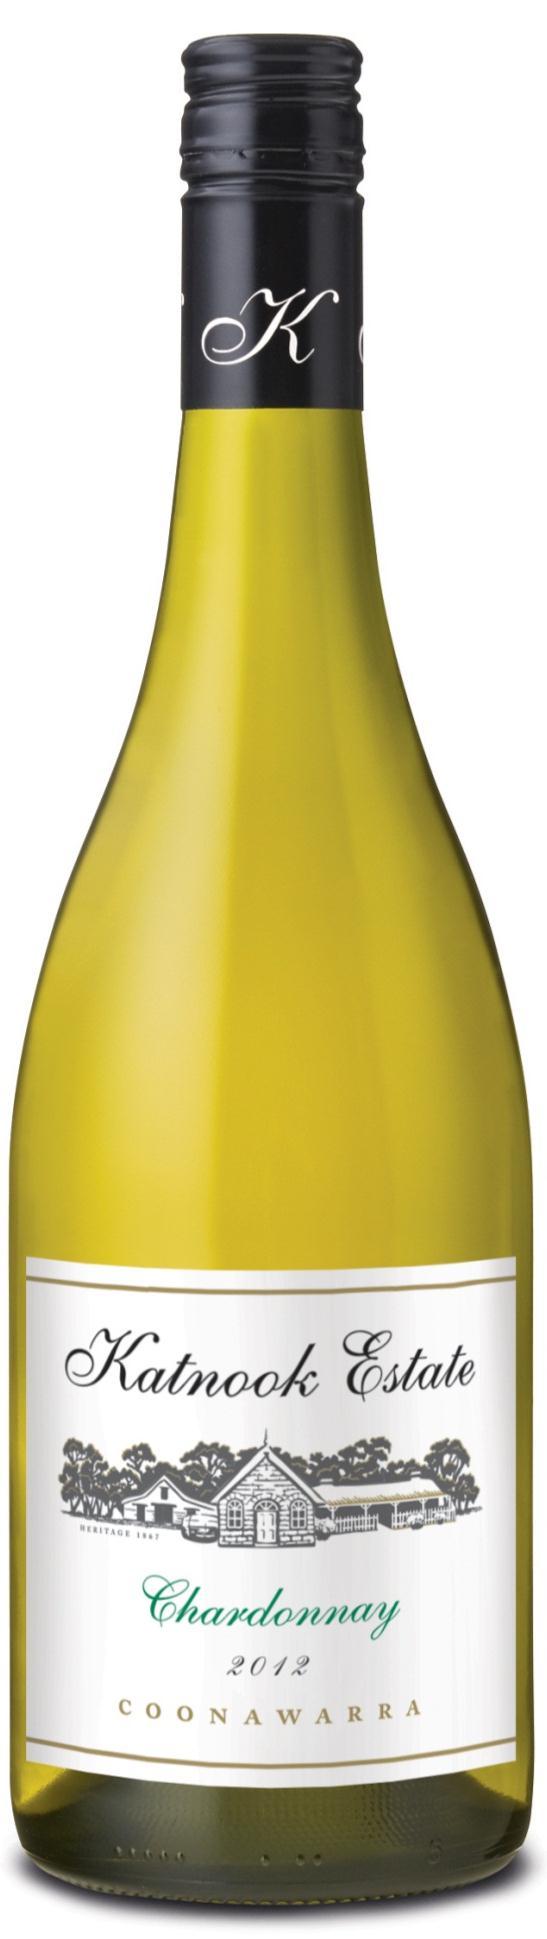 Katnook Estate Chardonnay 2012 The Katnook Estate range of premium quality, single varietal wines are an expression of the classic and unique characteristics of the Coonawarra wine region.